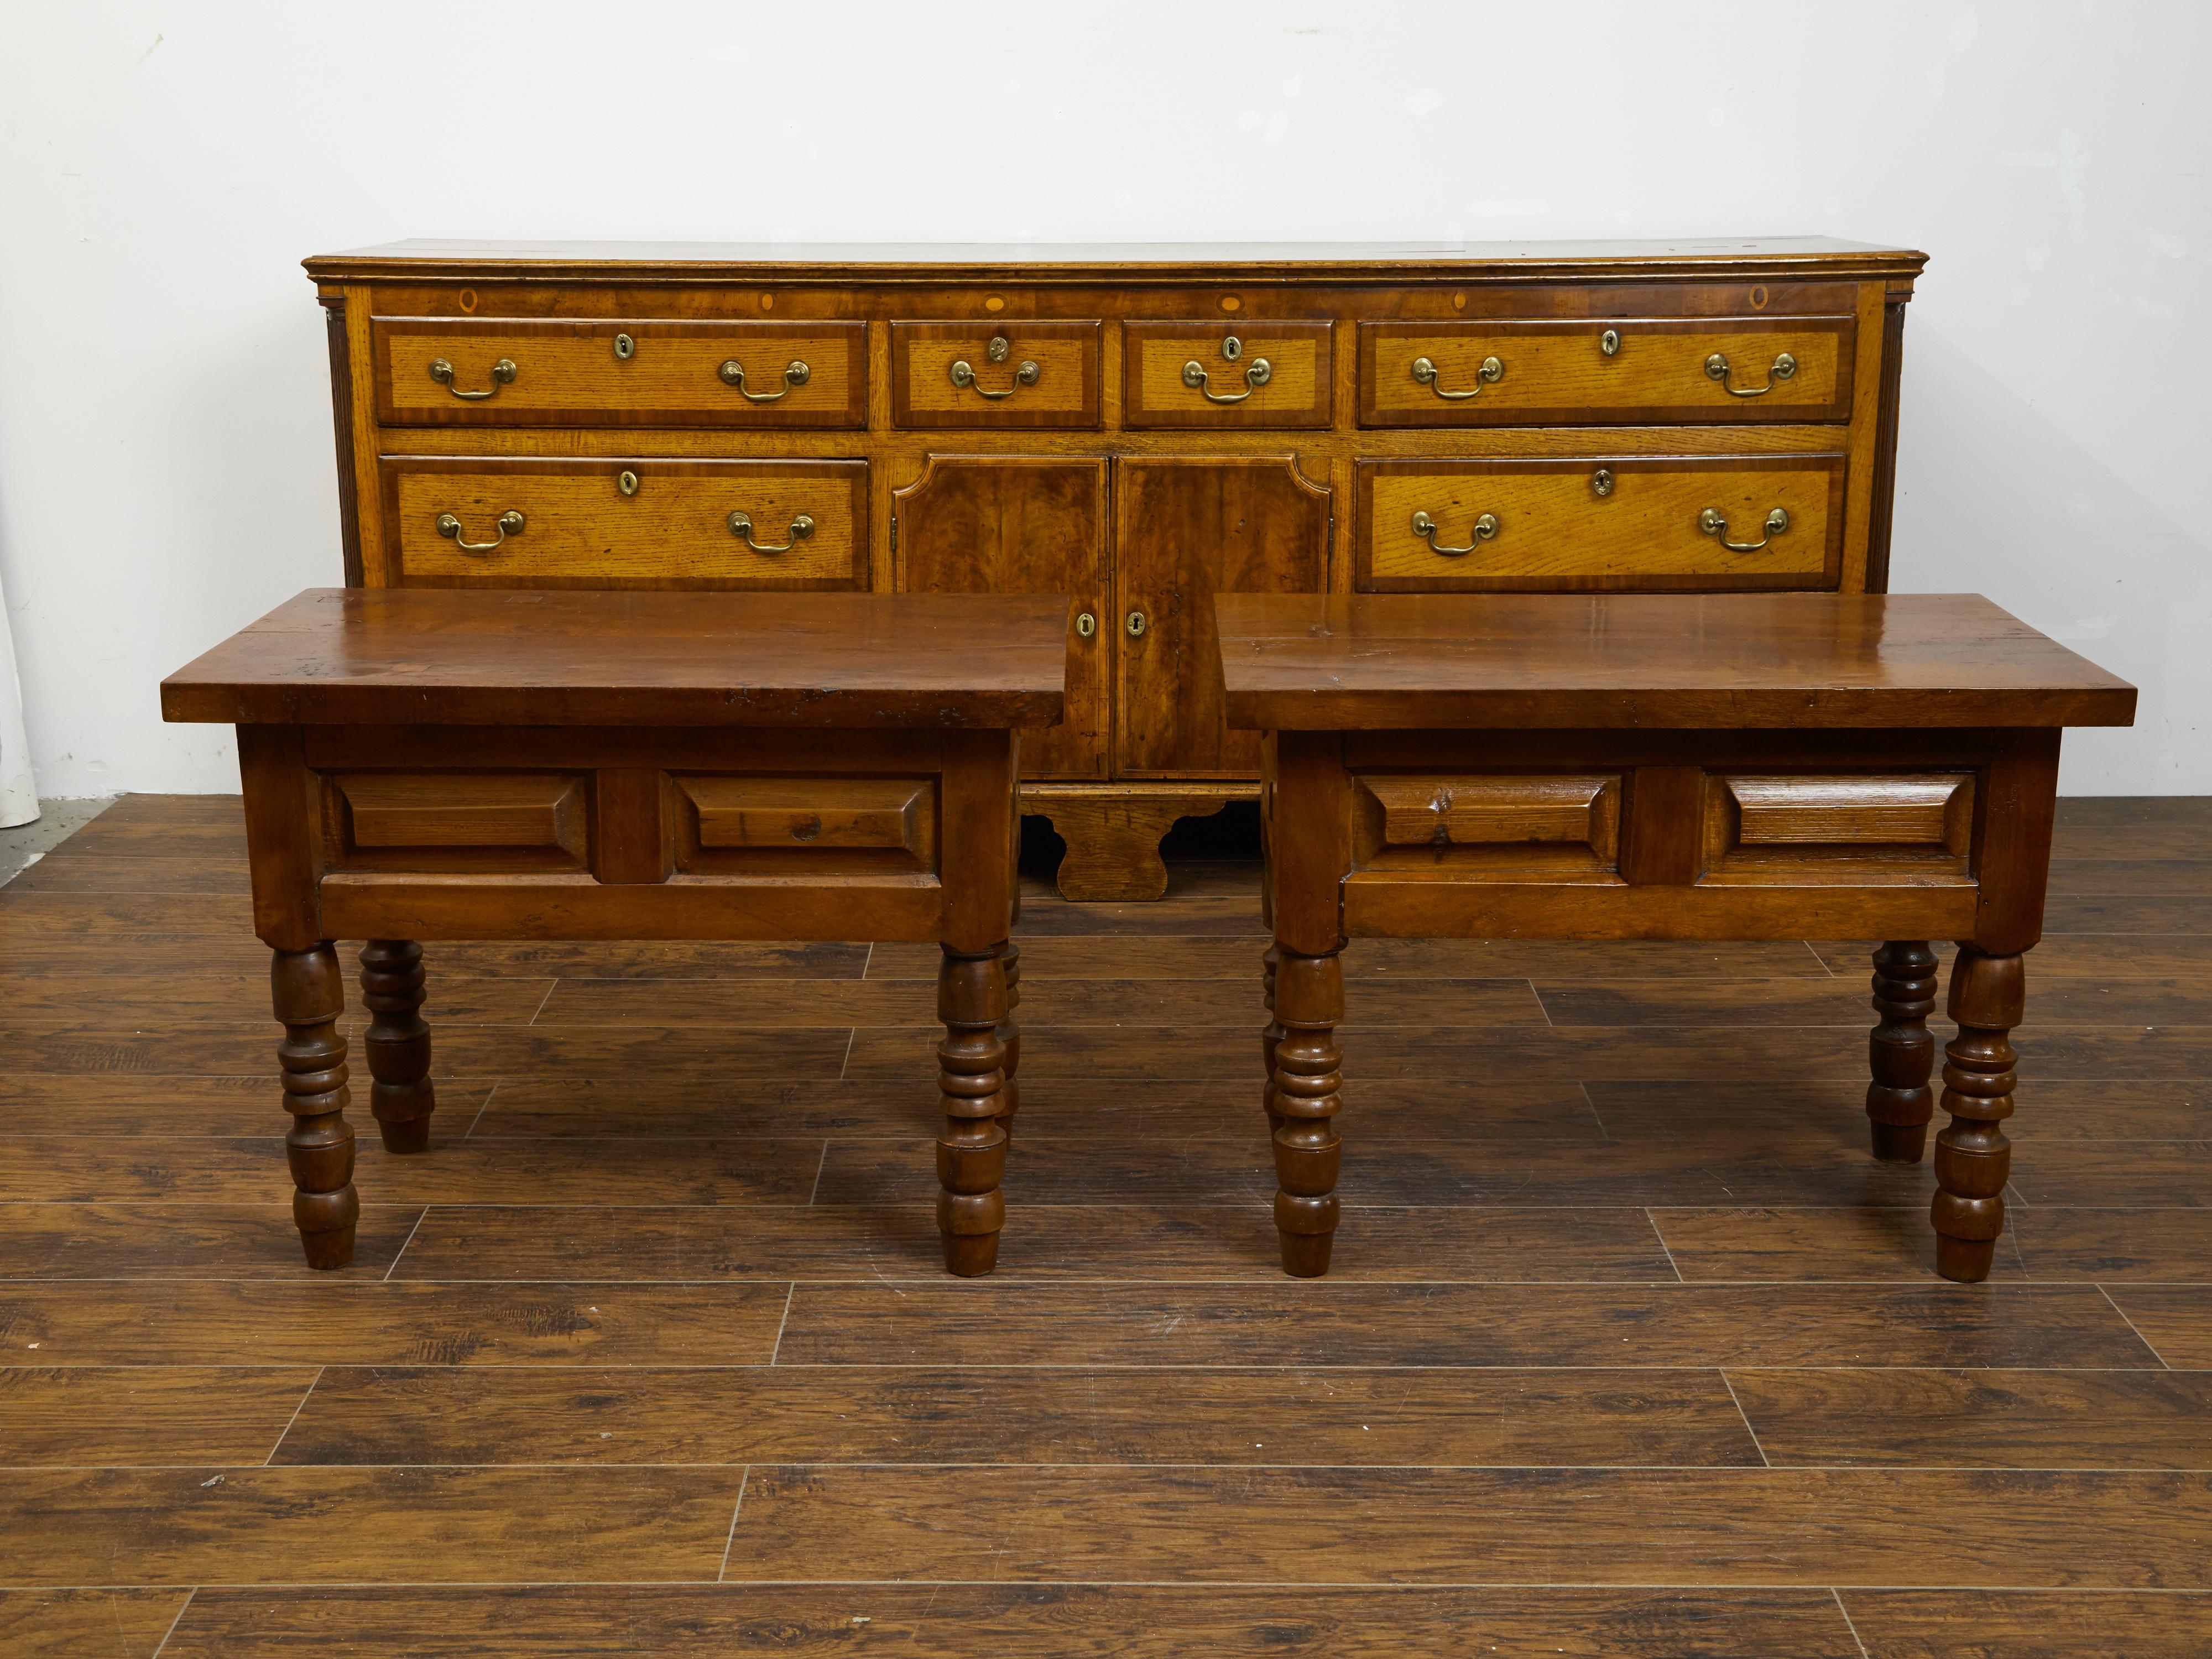 A pair of Continental walnut side tables from the 19th century, with raised panels and turned legs. Created during the 19th century, each of this pair of Continental side tables features a rectangular top sitting above an apron adorned with raised